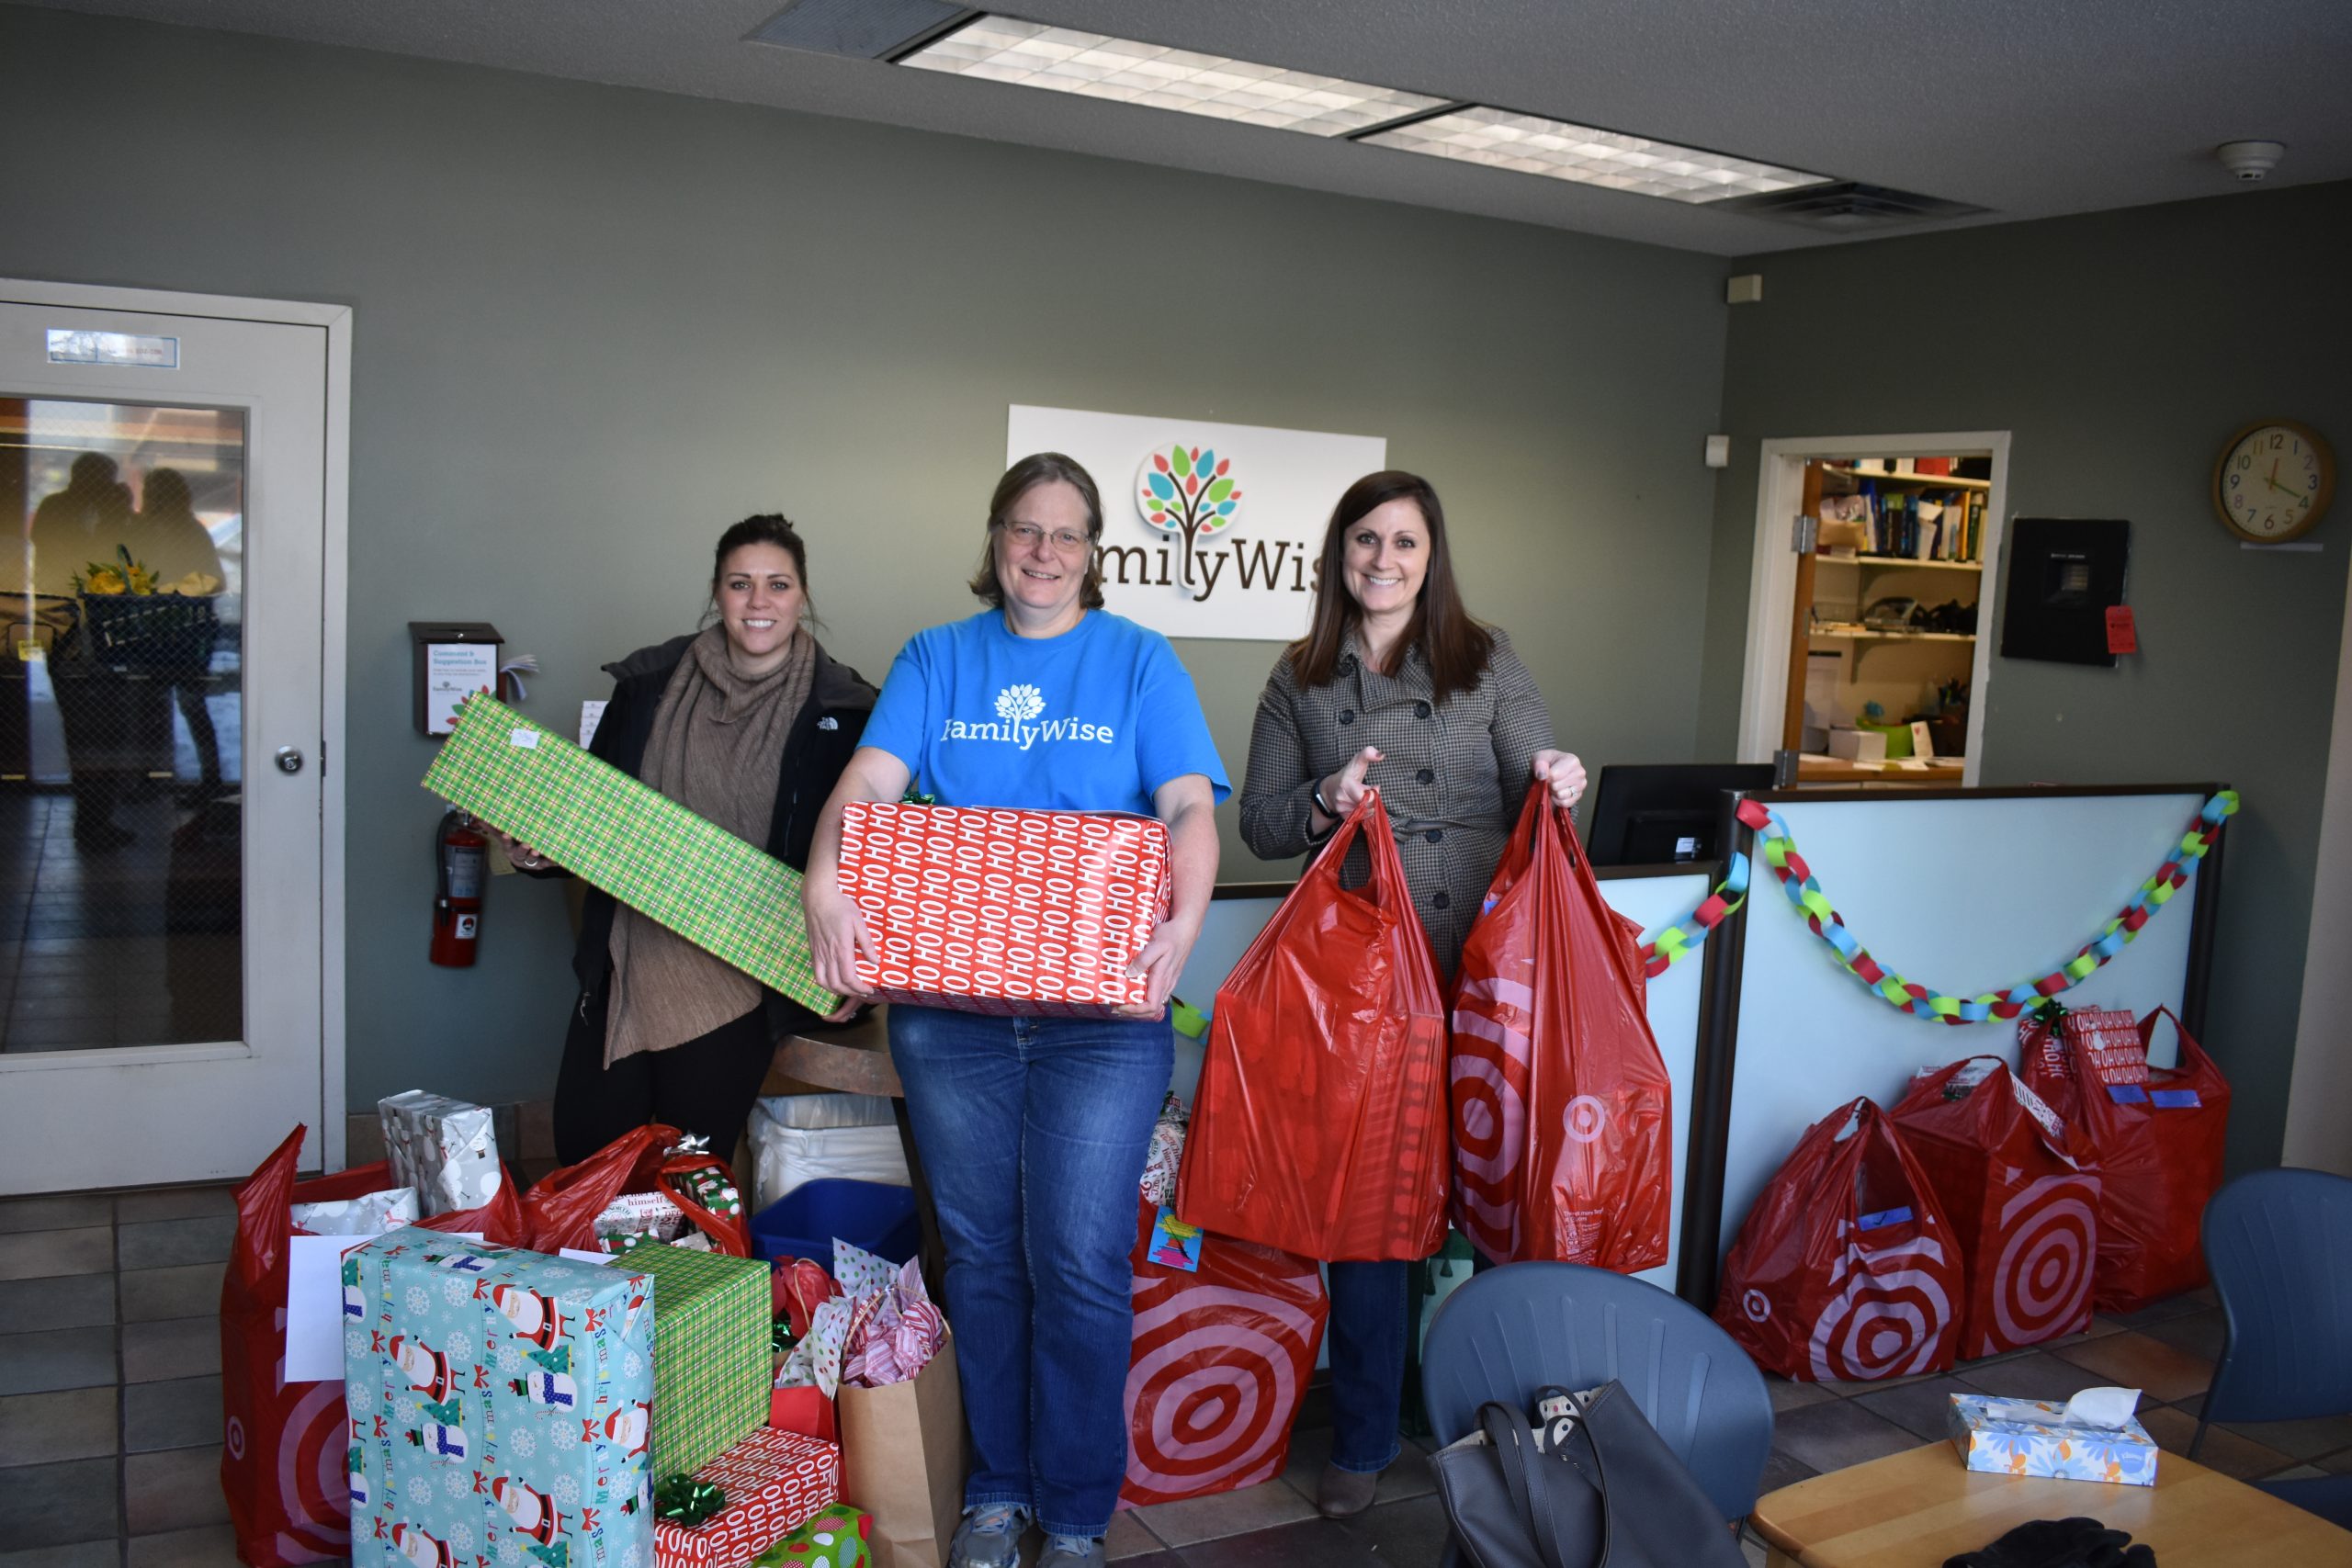 Delivering presents to FamilyWise